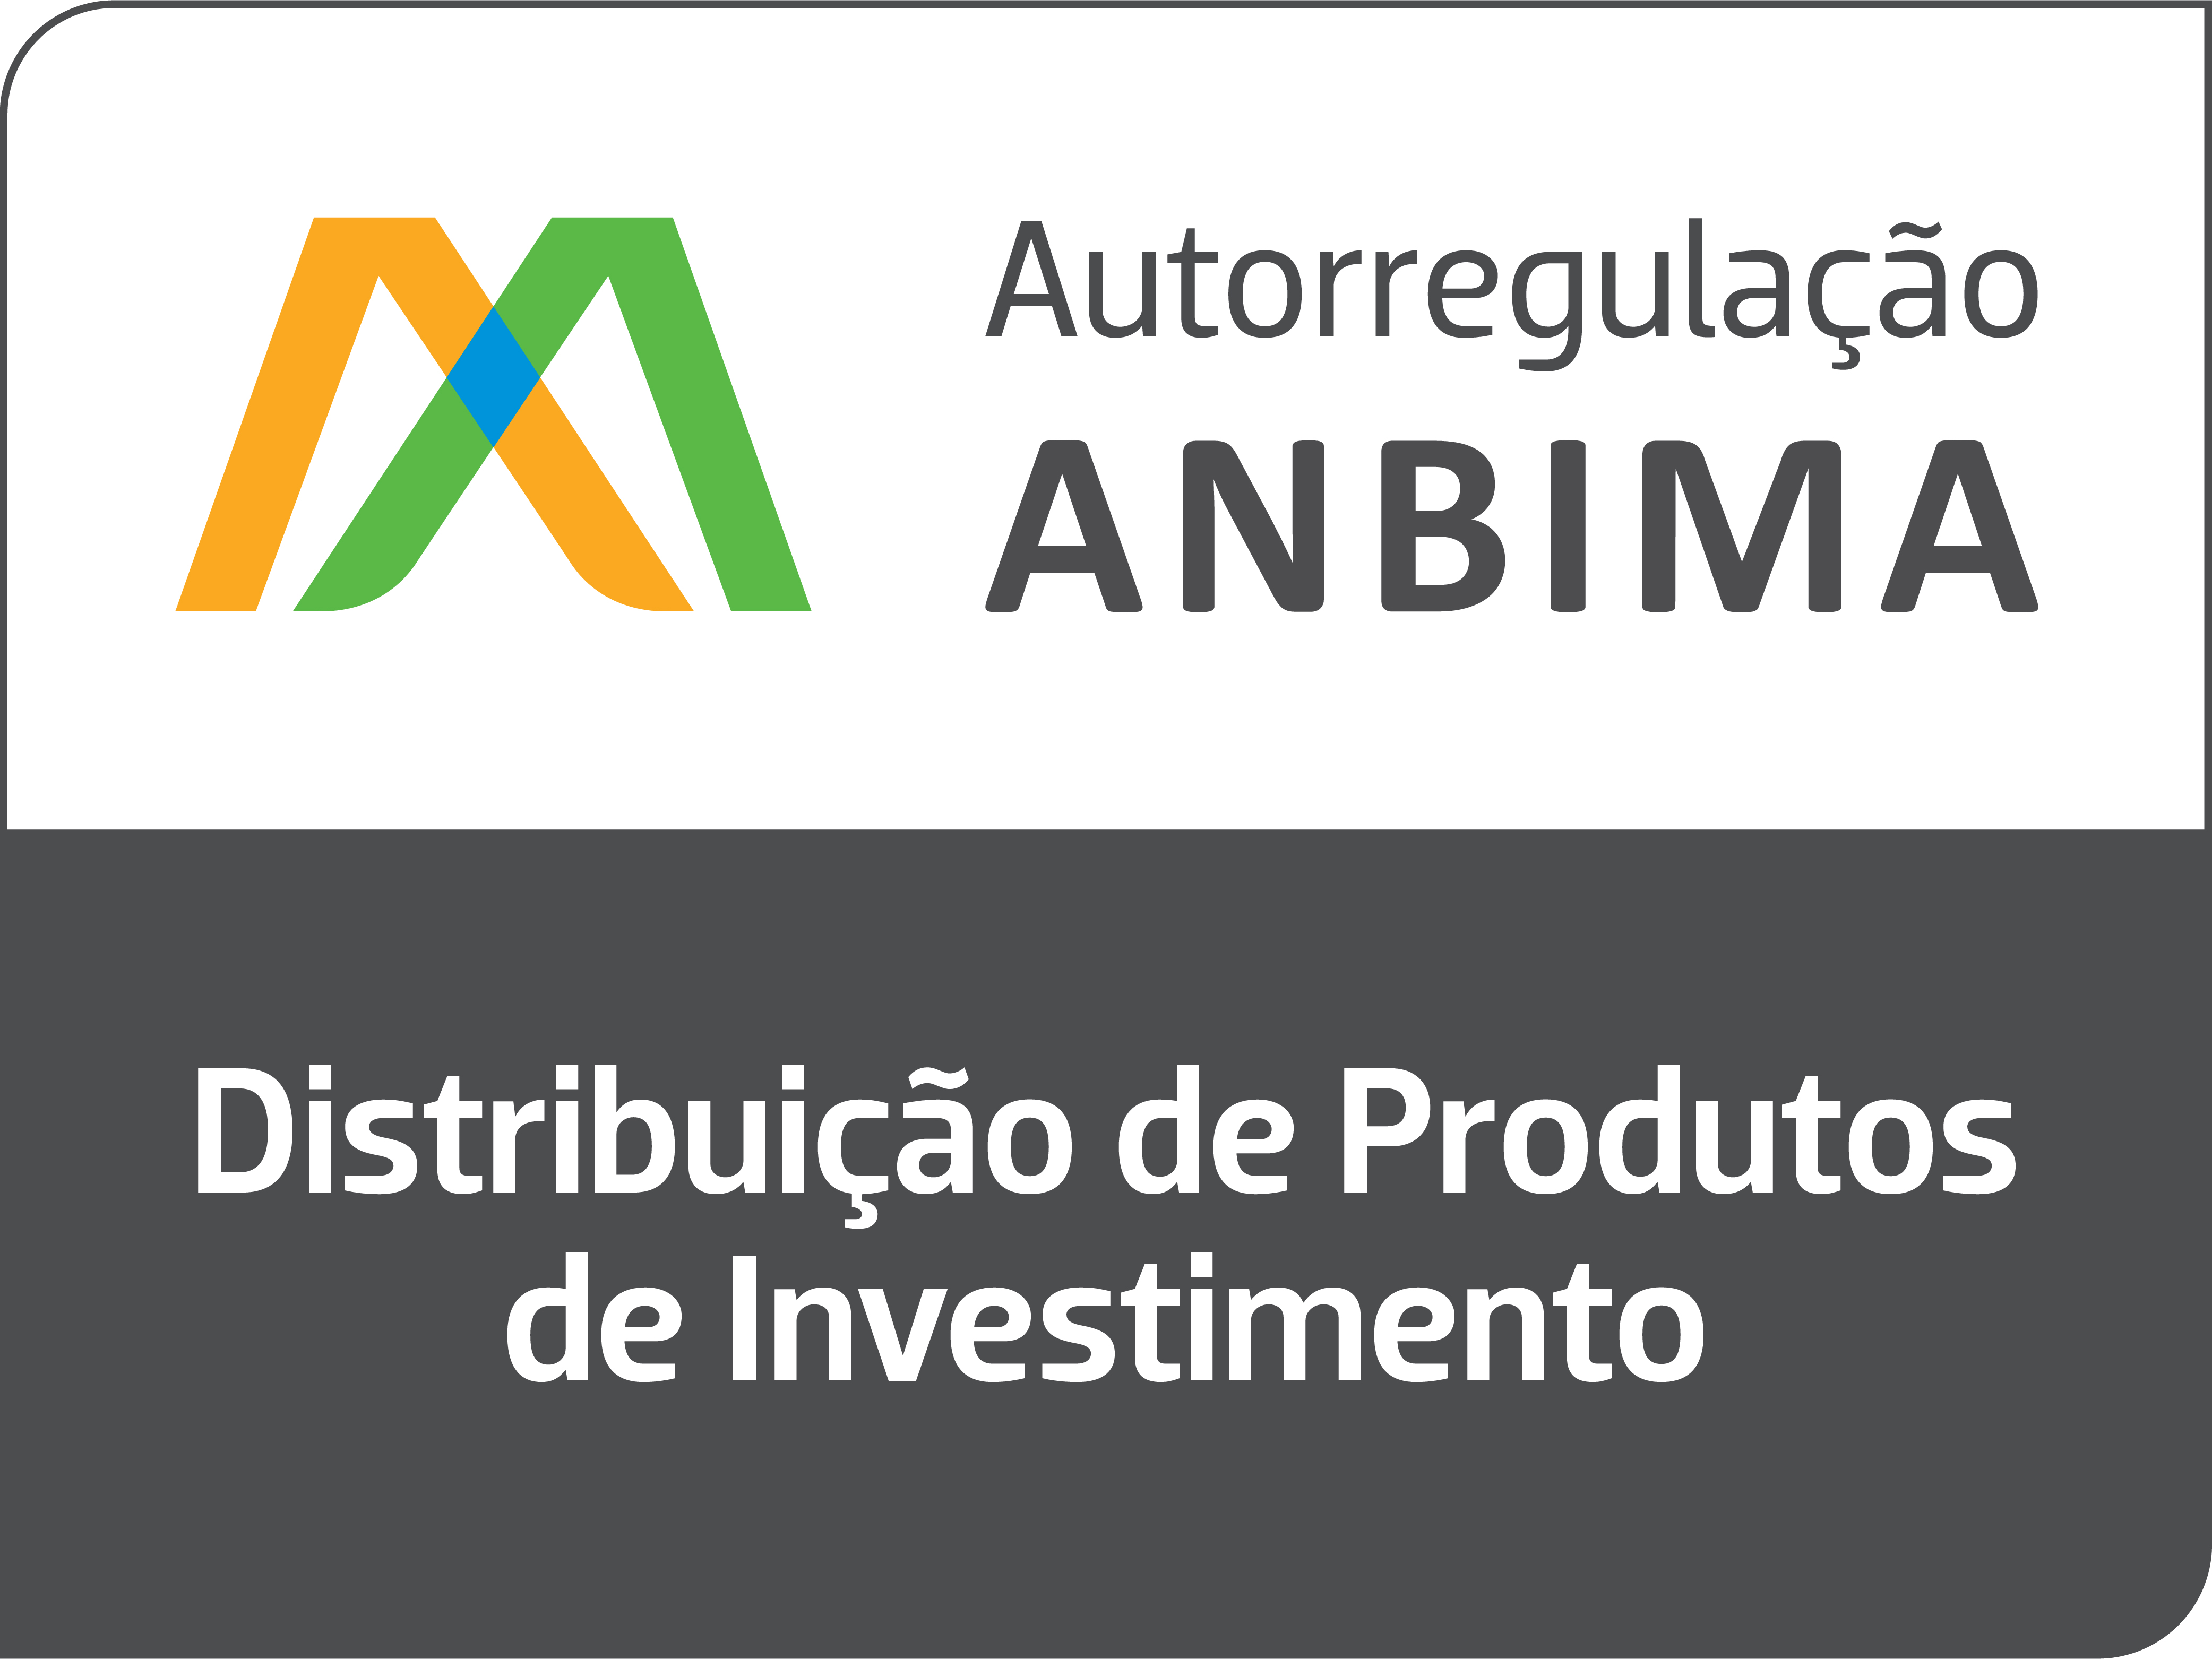 AMBIMA Logo - Distribution of Permanent Investment Products